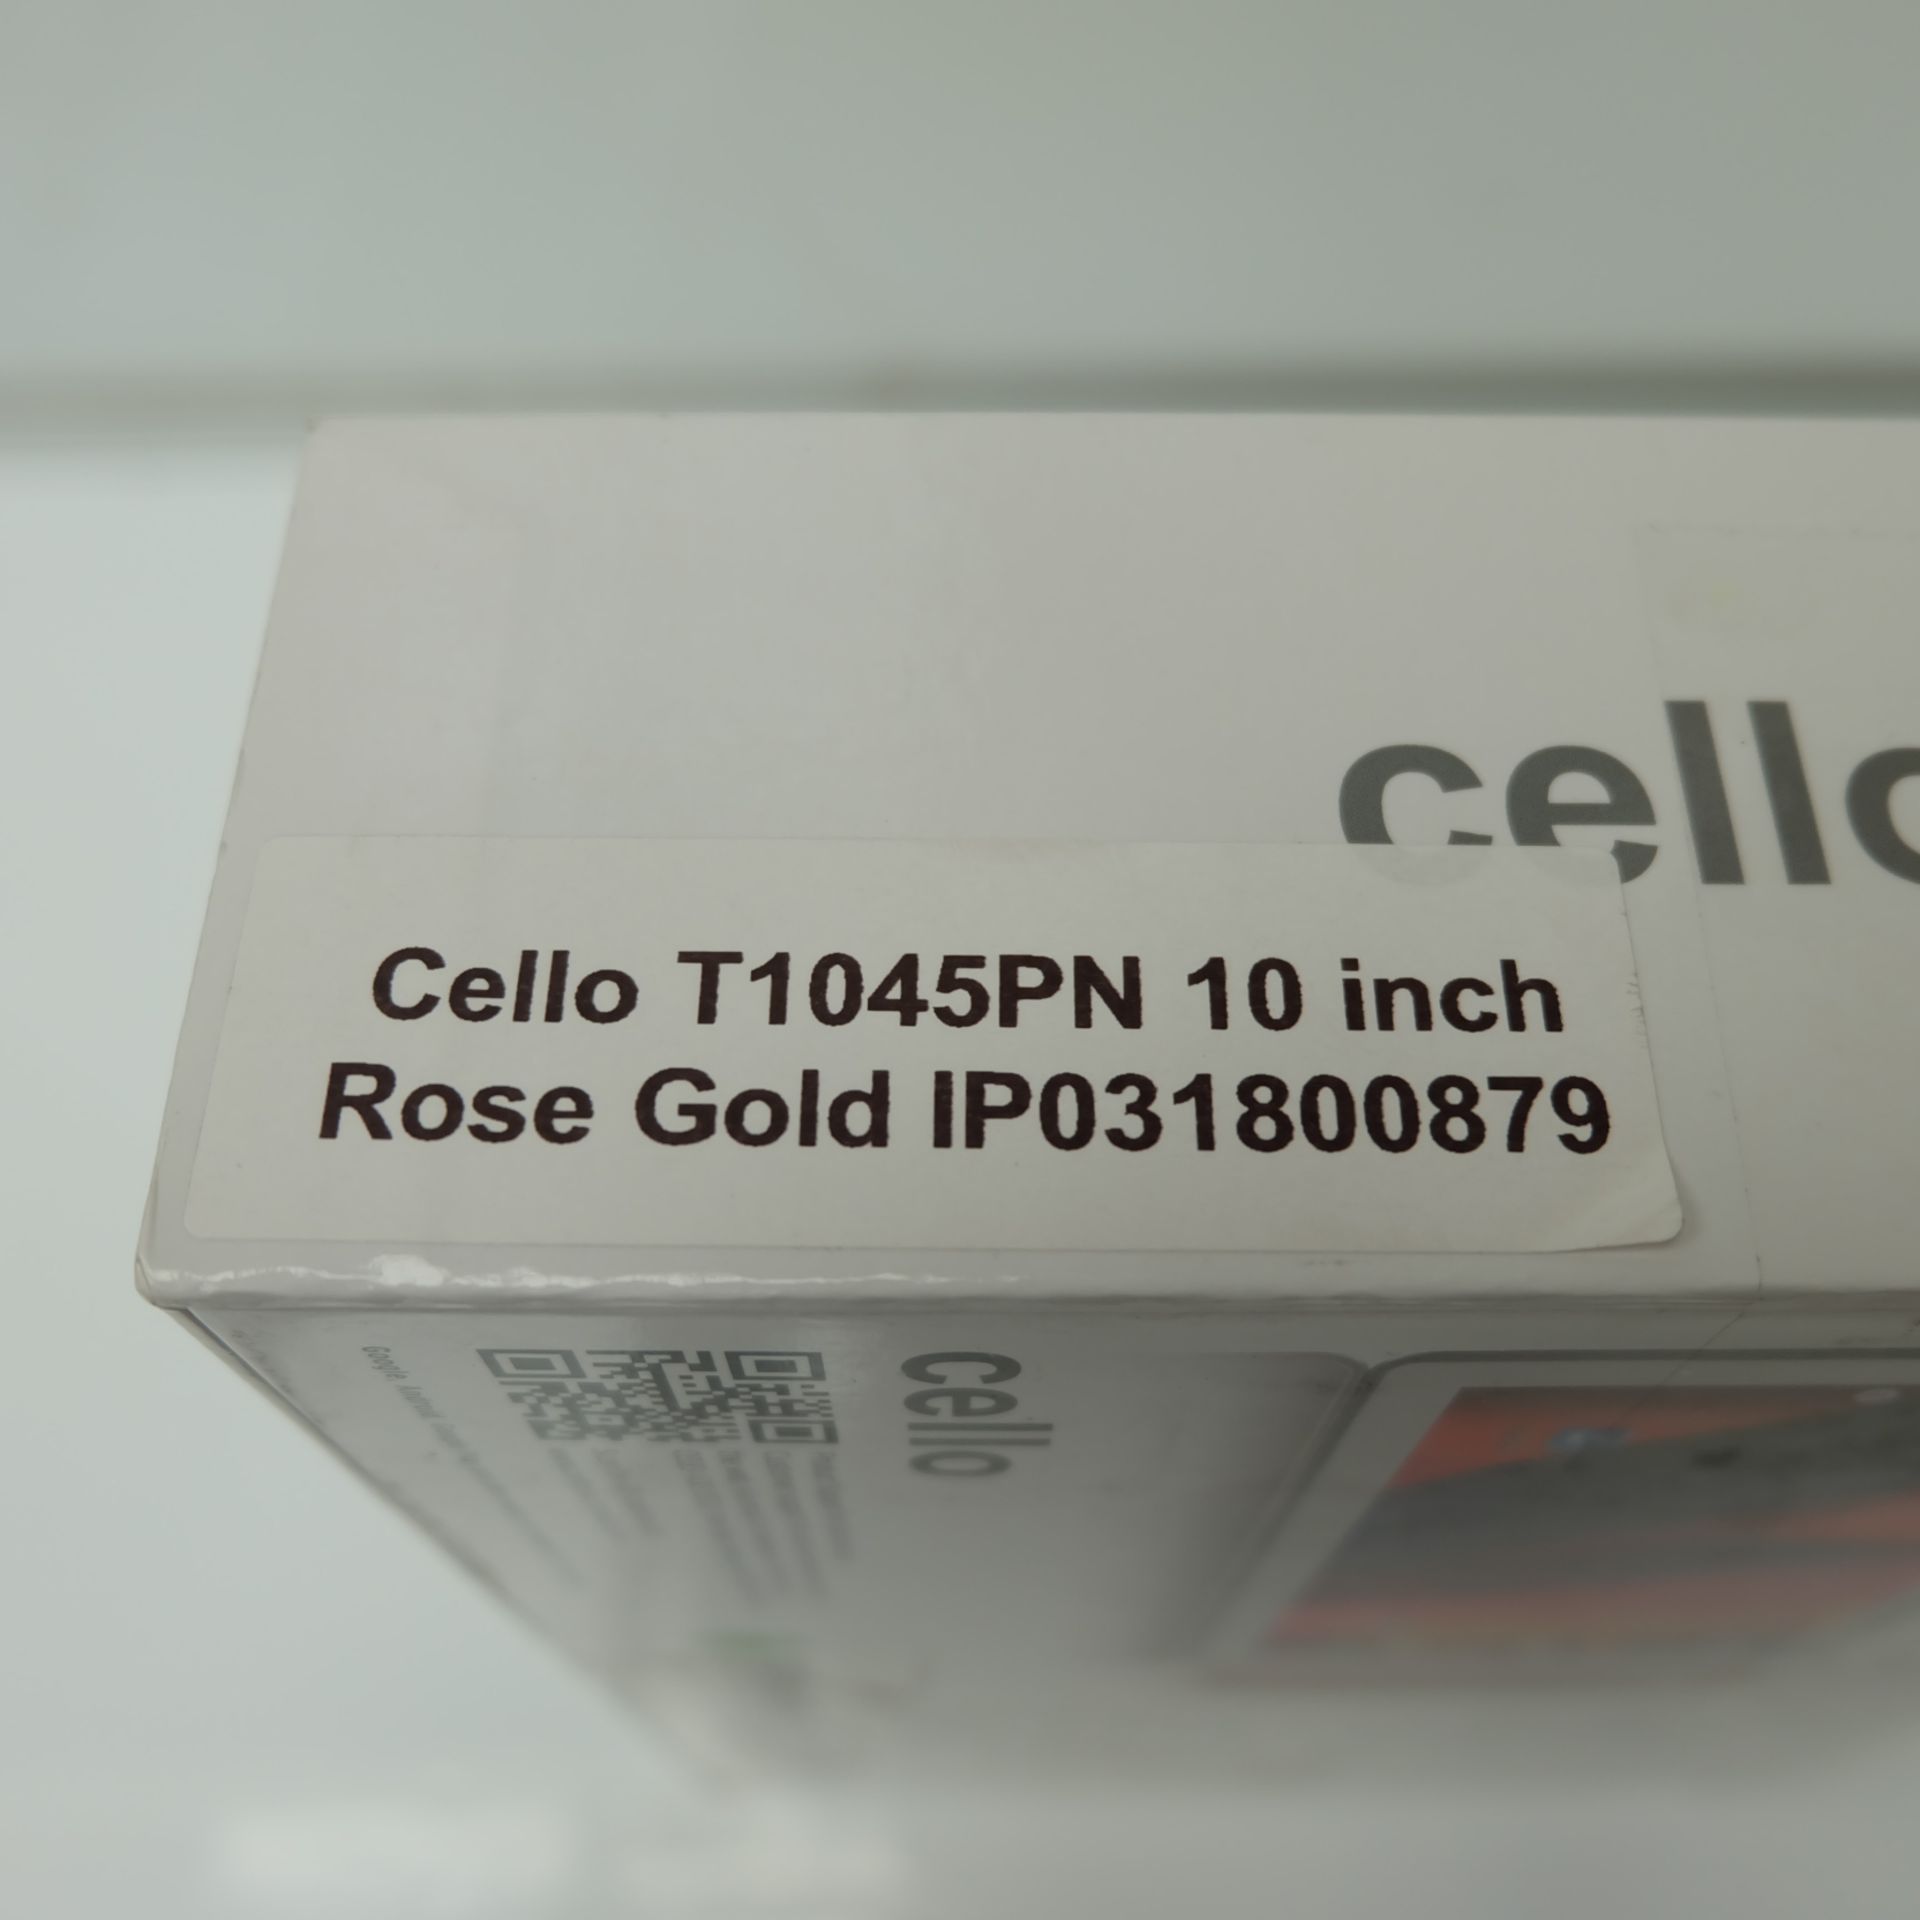 Cello Model T 1045PN 10 Inch Quad Core Tablet. (Rose Gold) Version Android 7.0. 1 GB RAM. - Image 4 of 7